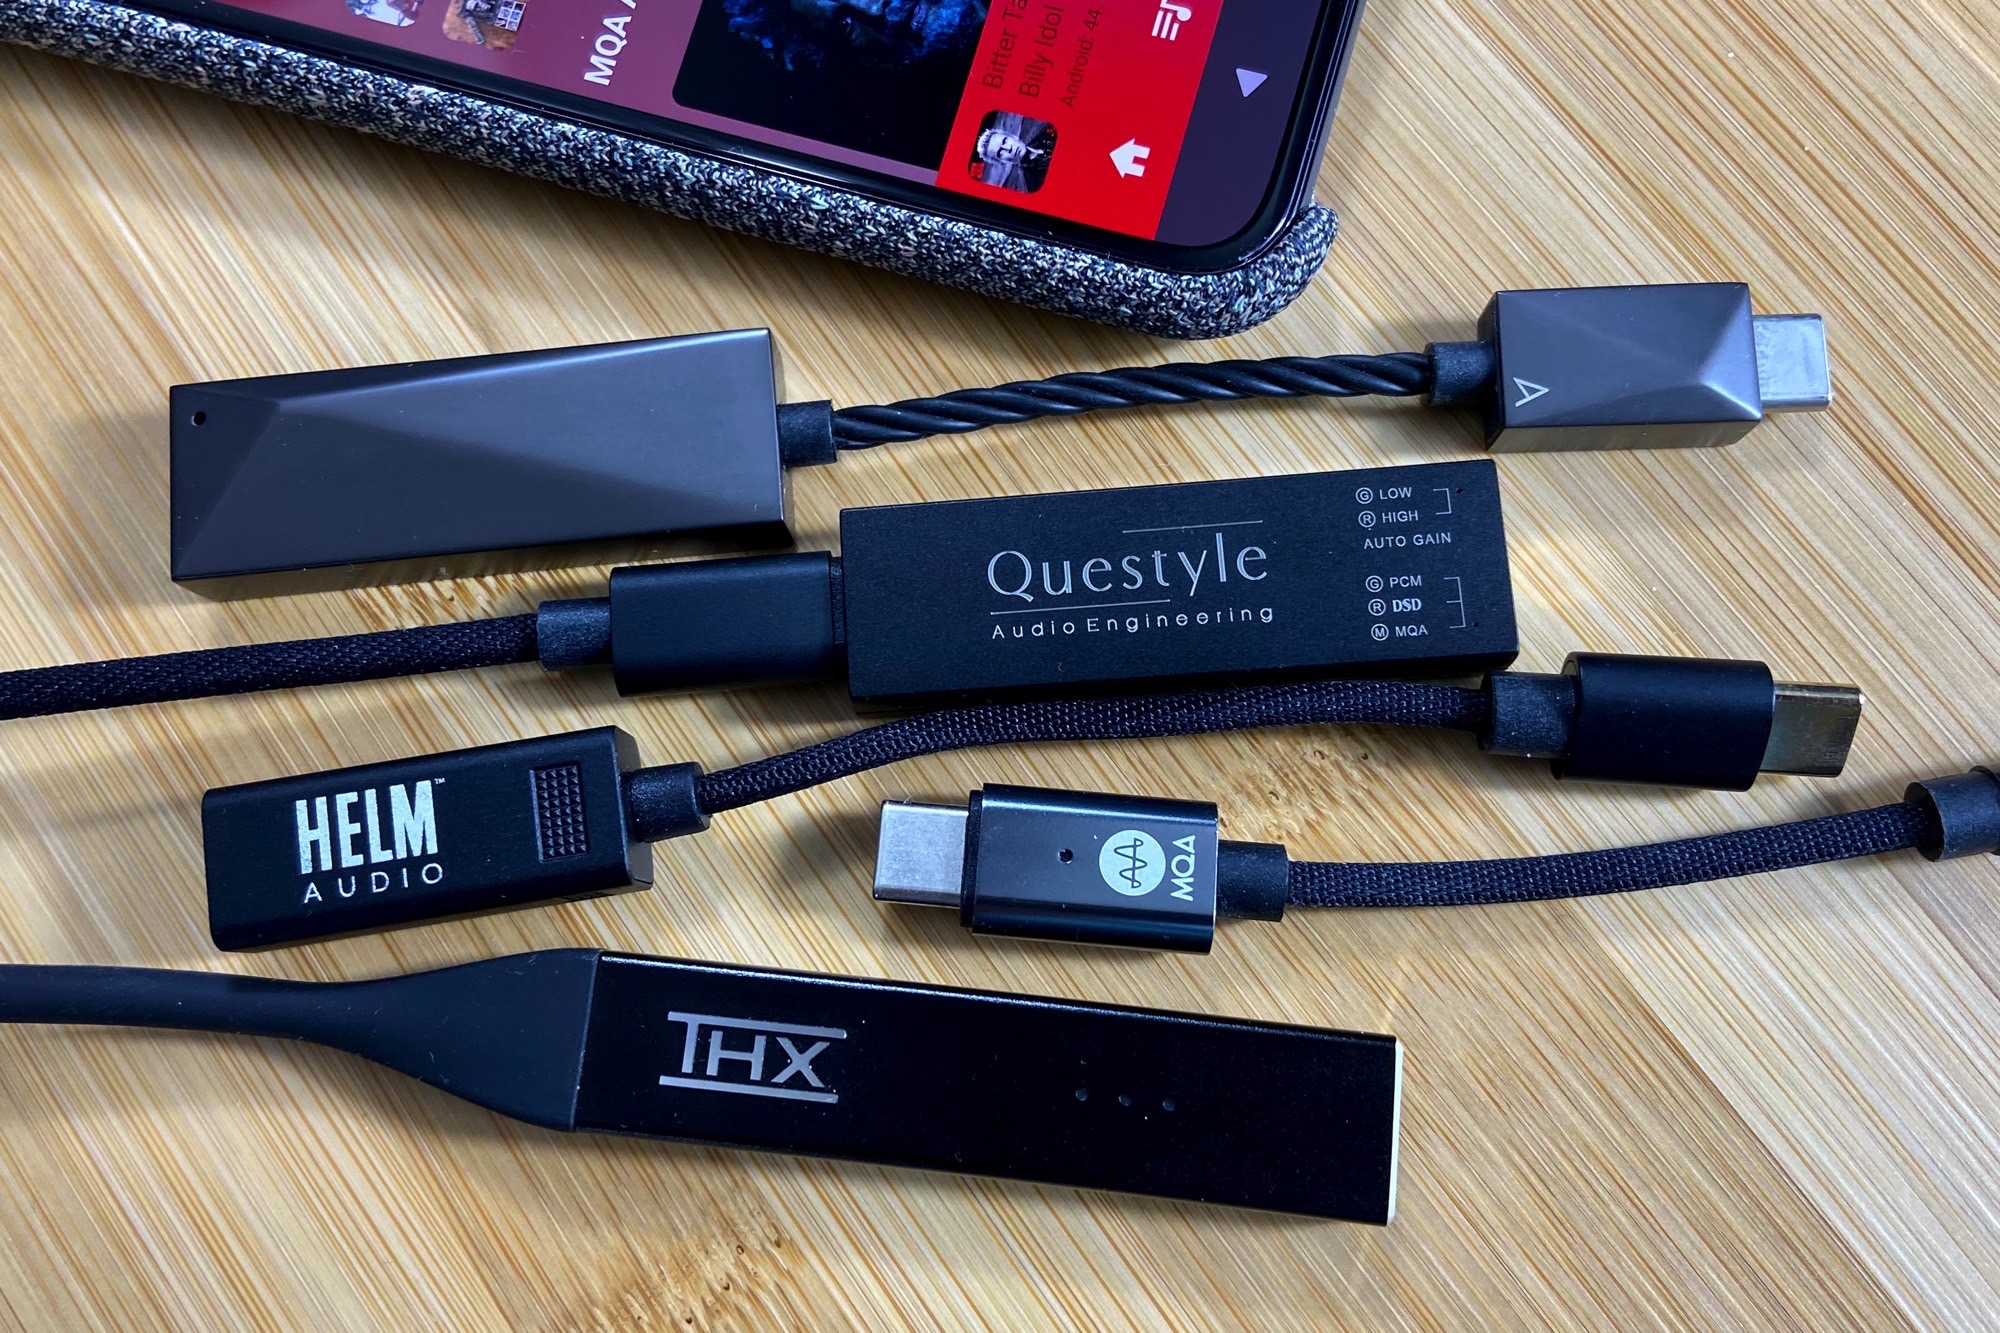 hud plisseret Lad os gøre det Headphone DAC/amps: The best way to enjoy lossless audio | Digital Trends